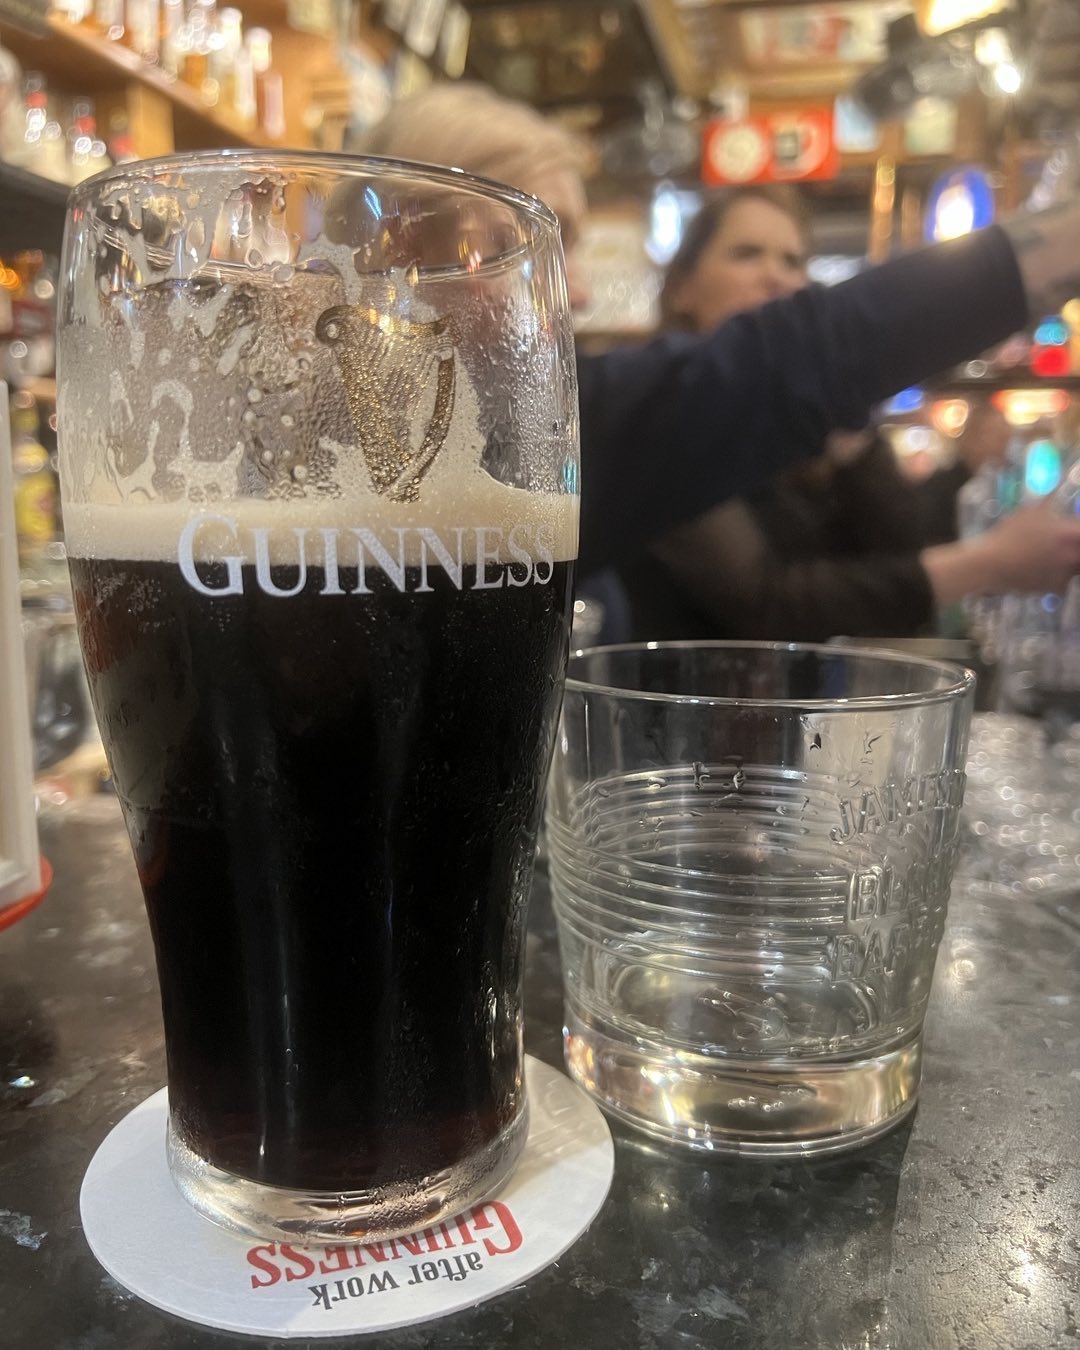 Found the best pint of Guinness in Belfast at the Duke of York (along with a few good drams)…